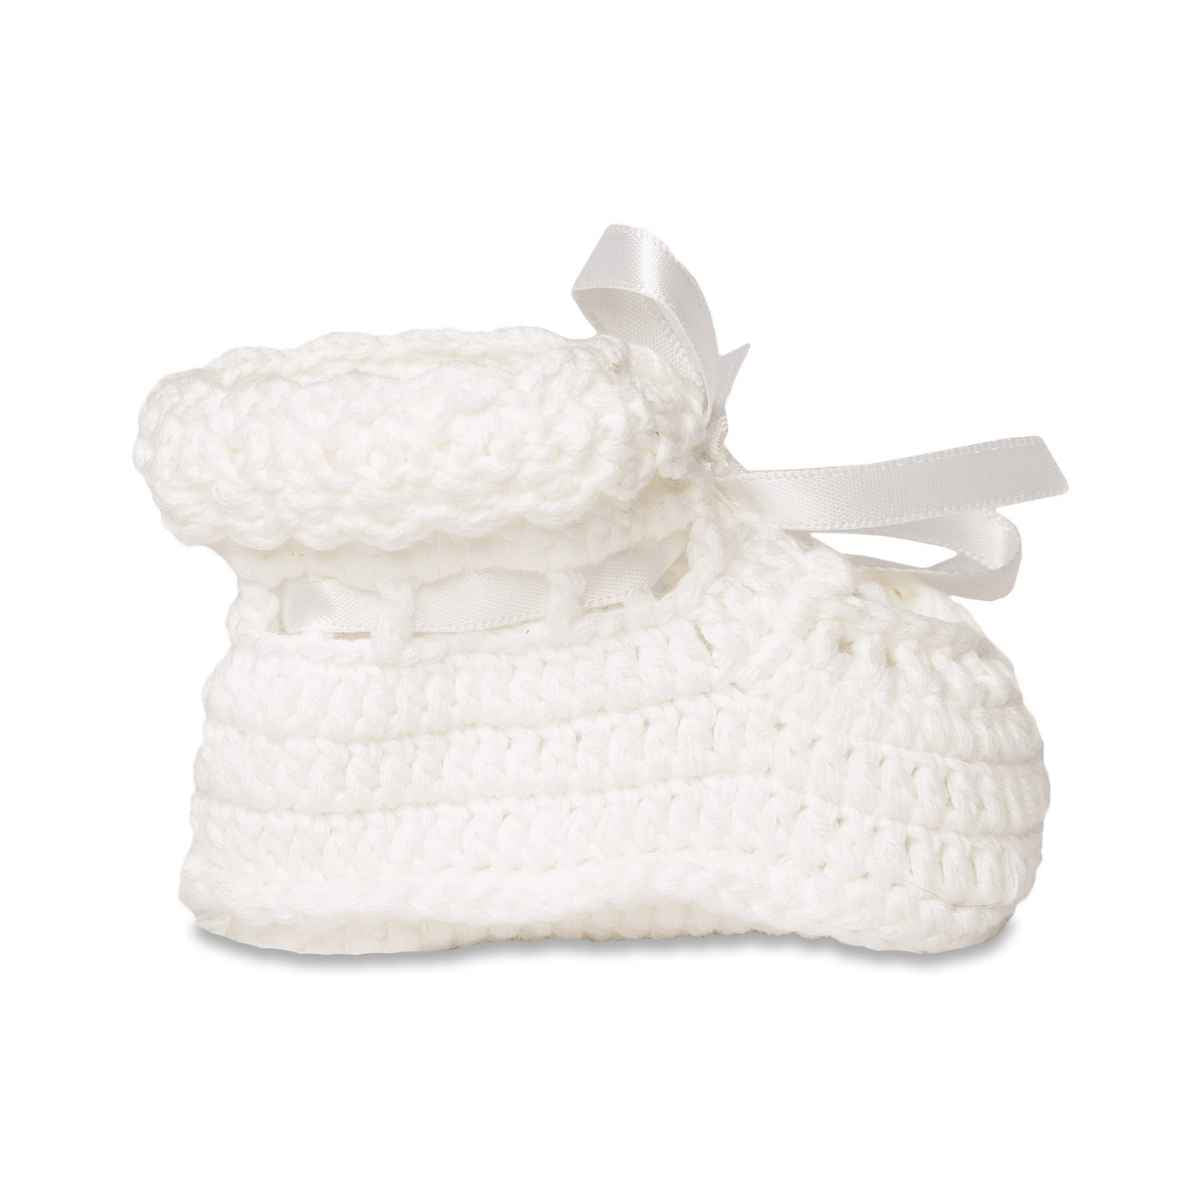 Erin White Crochet Baby Booties with Satin Ribbons